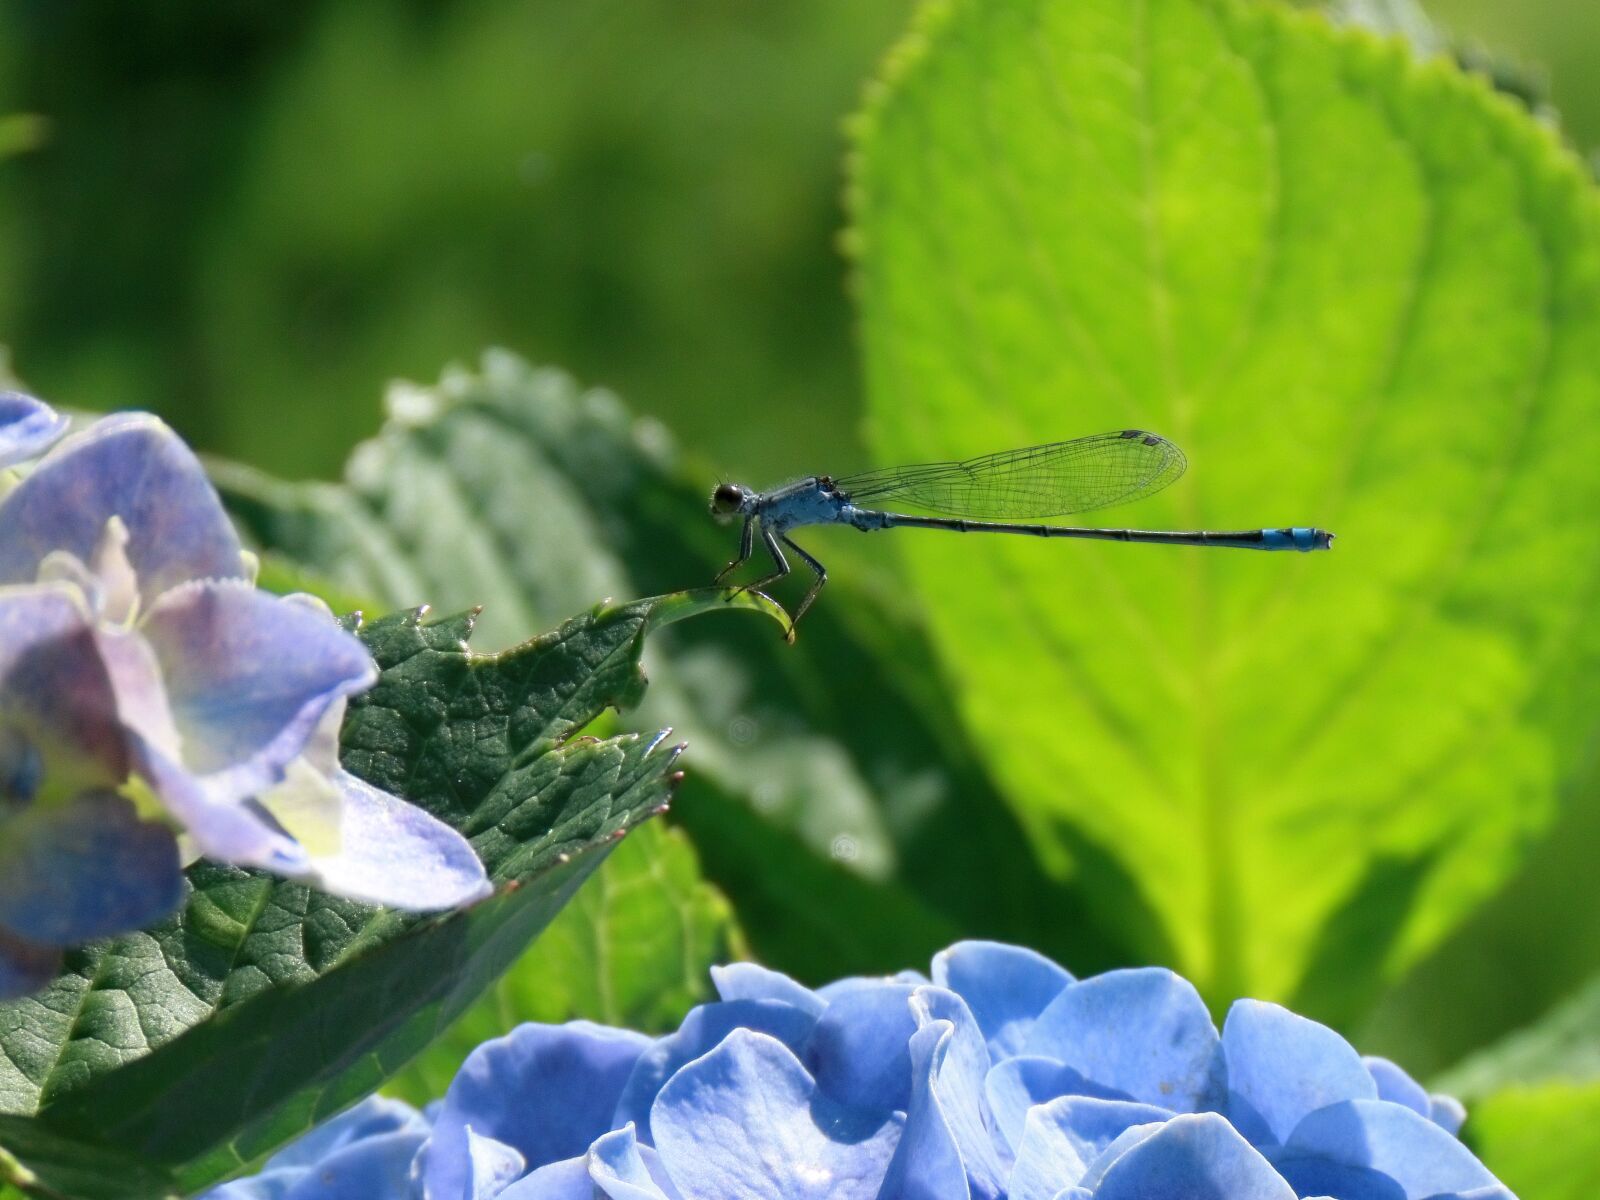 Canon PowerShot SX70 HS sample photo. Insect, dragonfly, damselflies photography